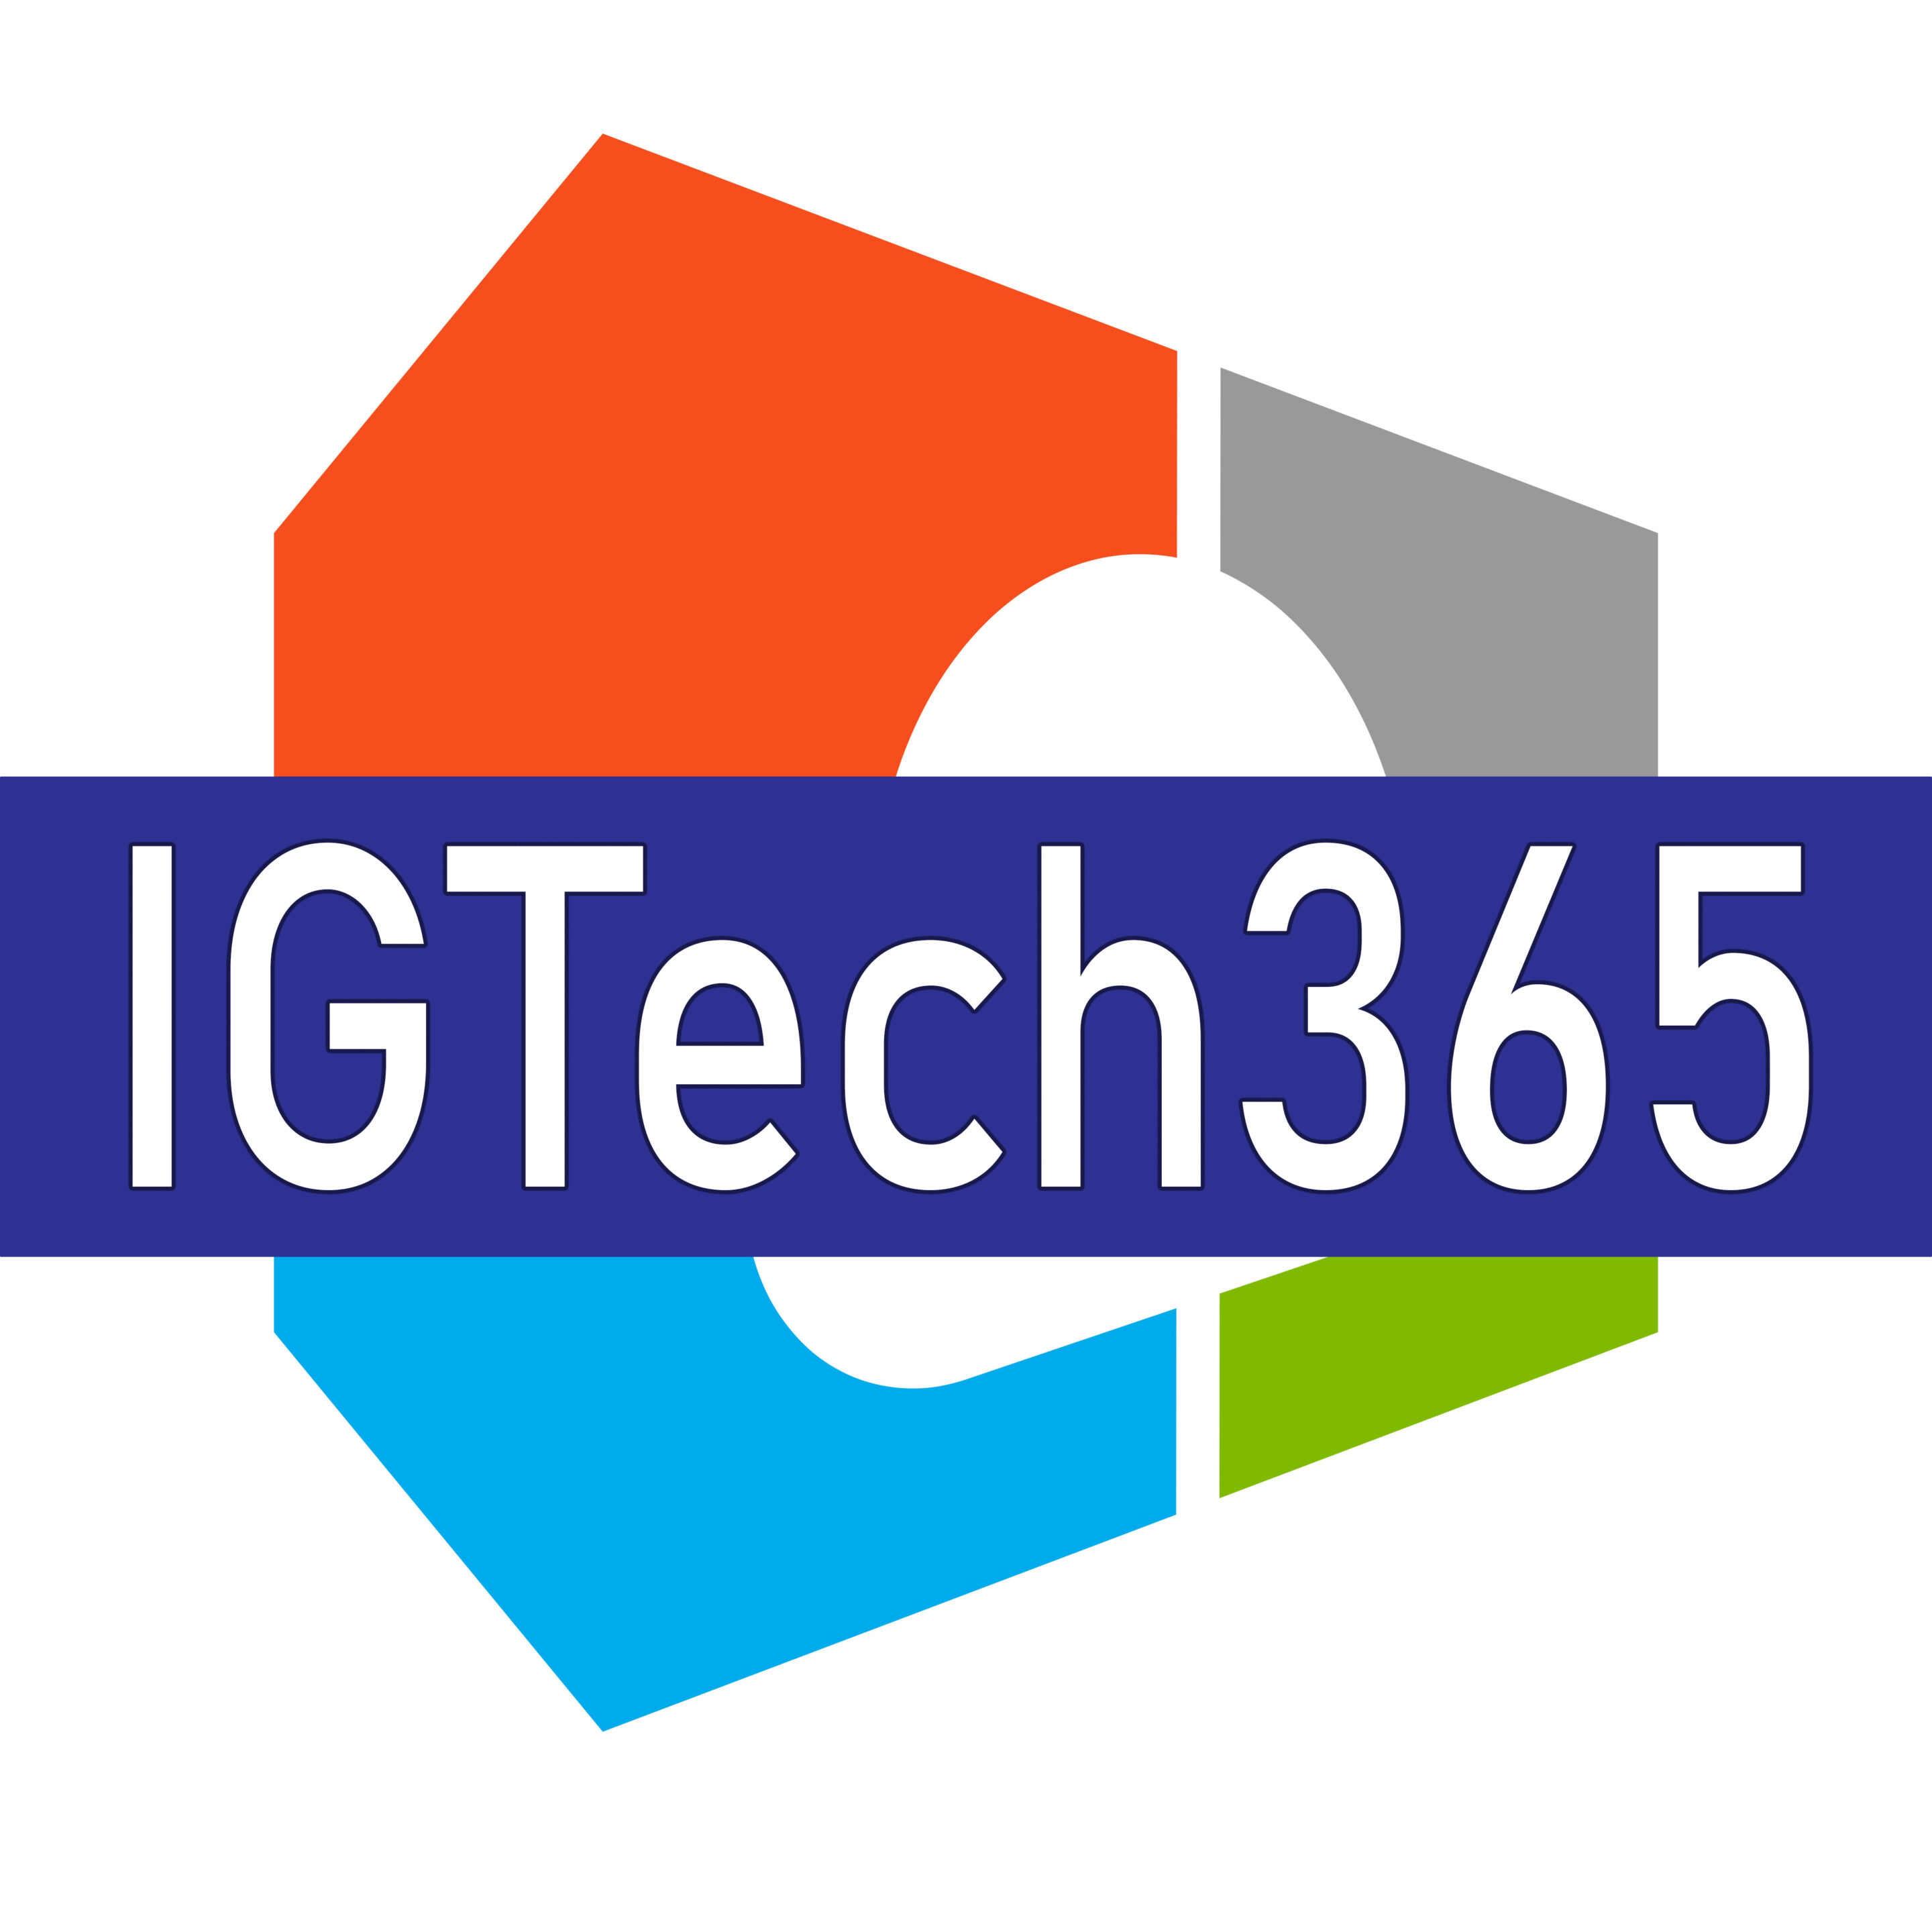 IGTech365 – Nationwide Worry-Free IT Support